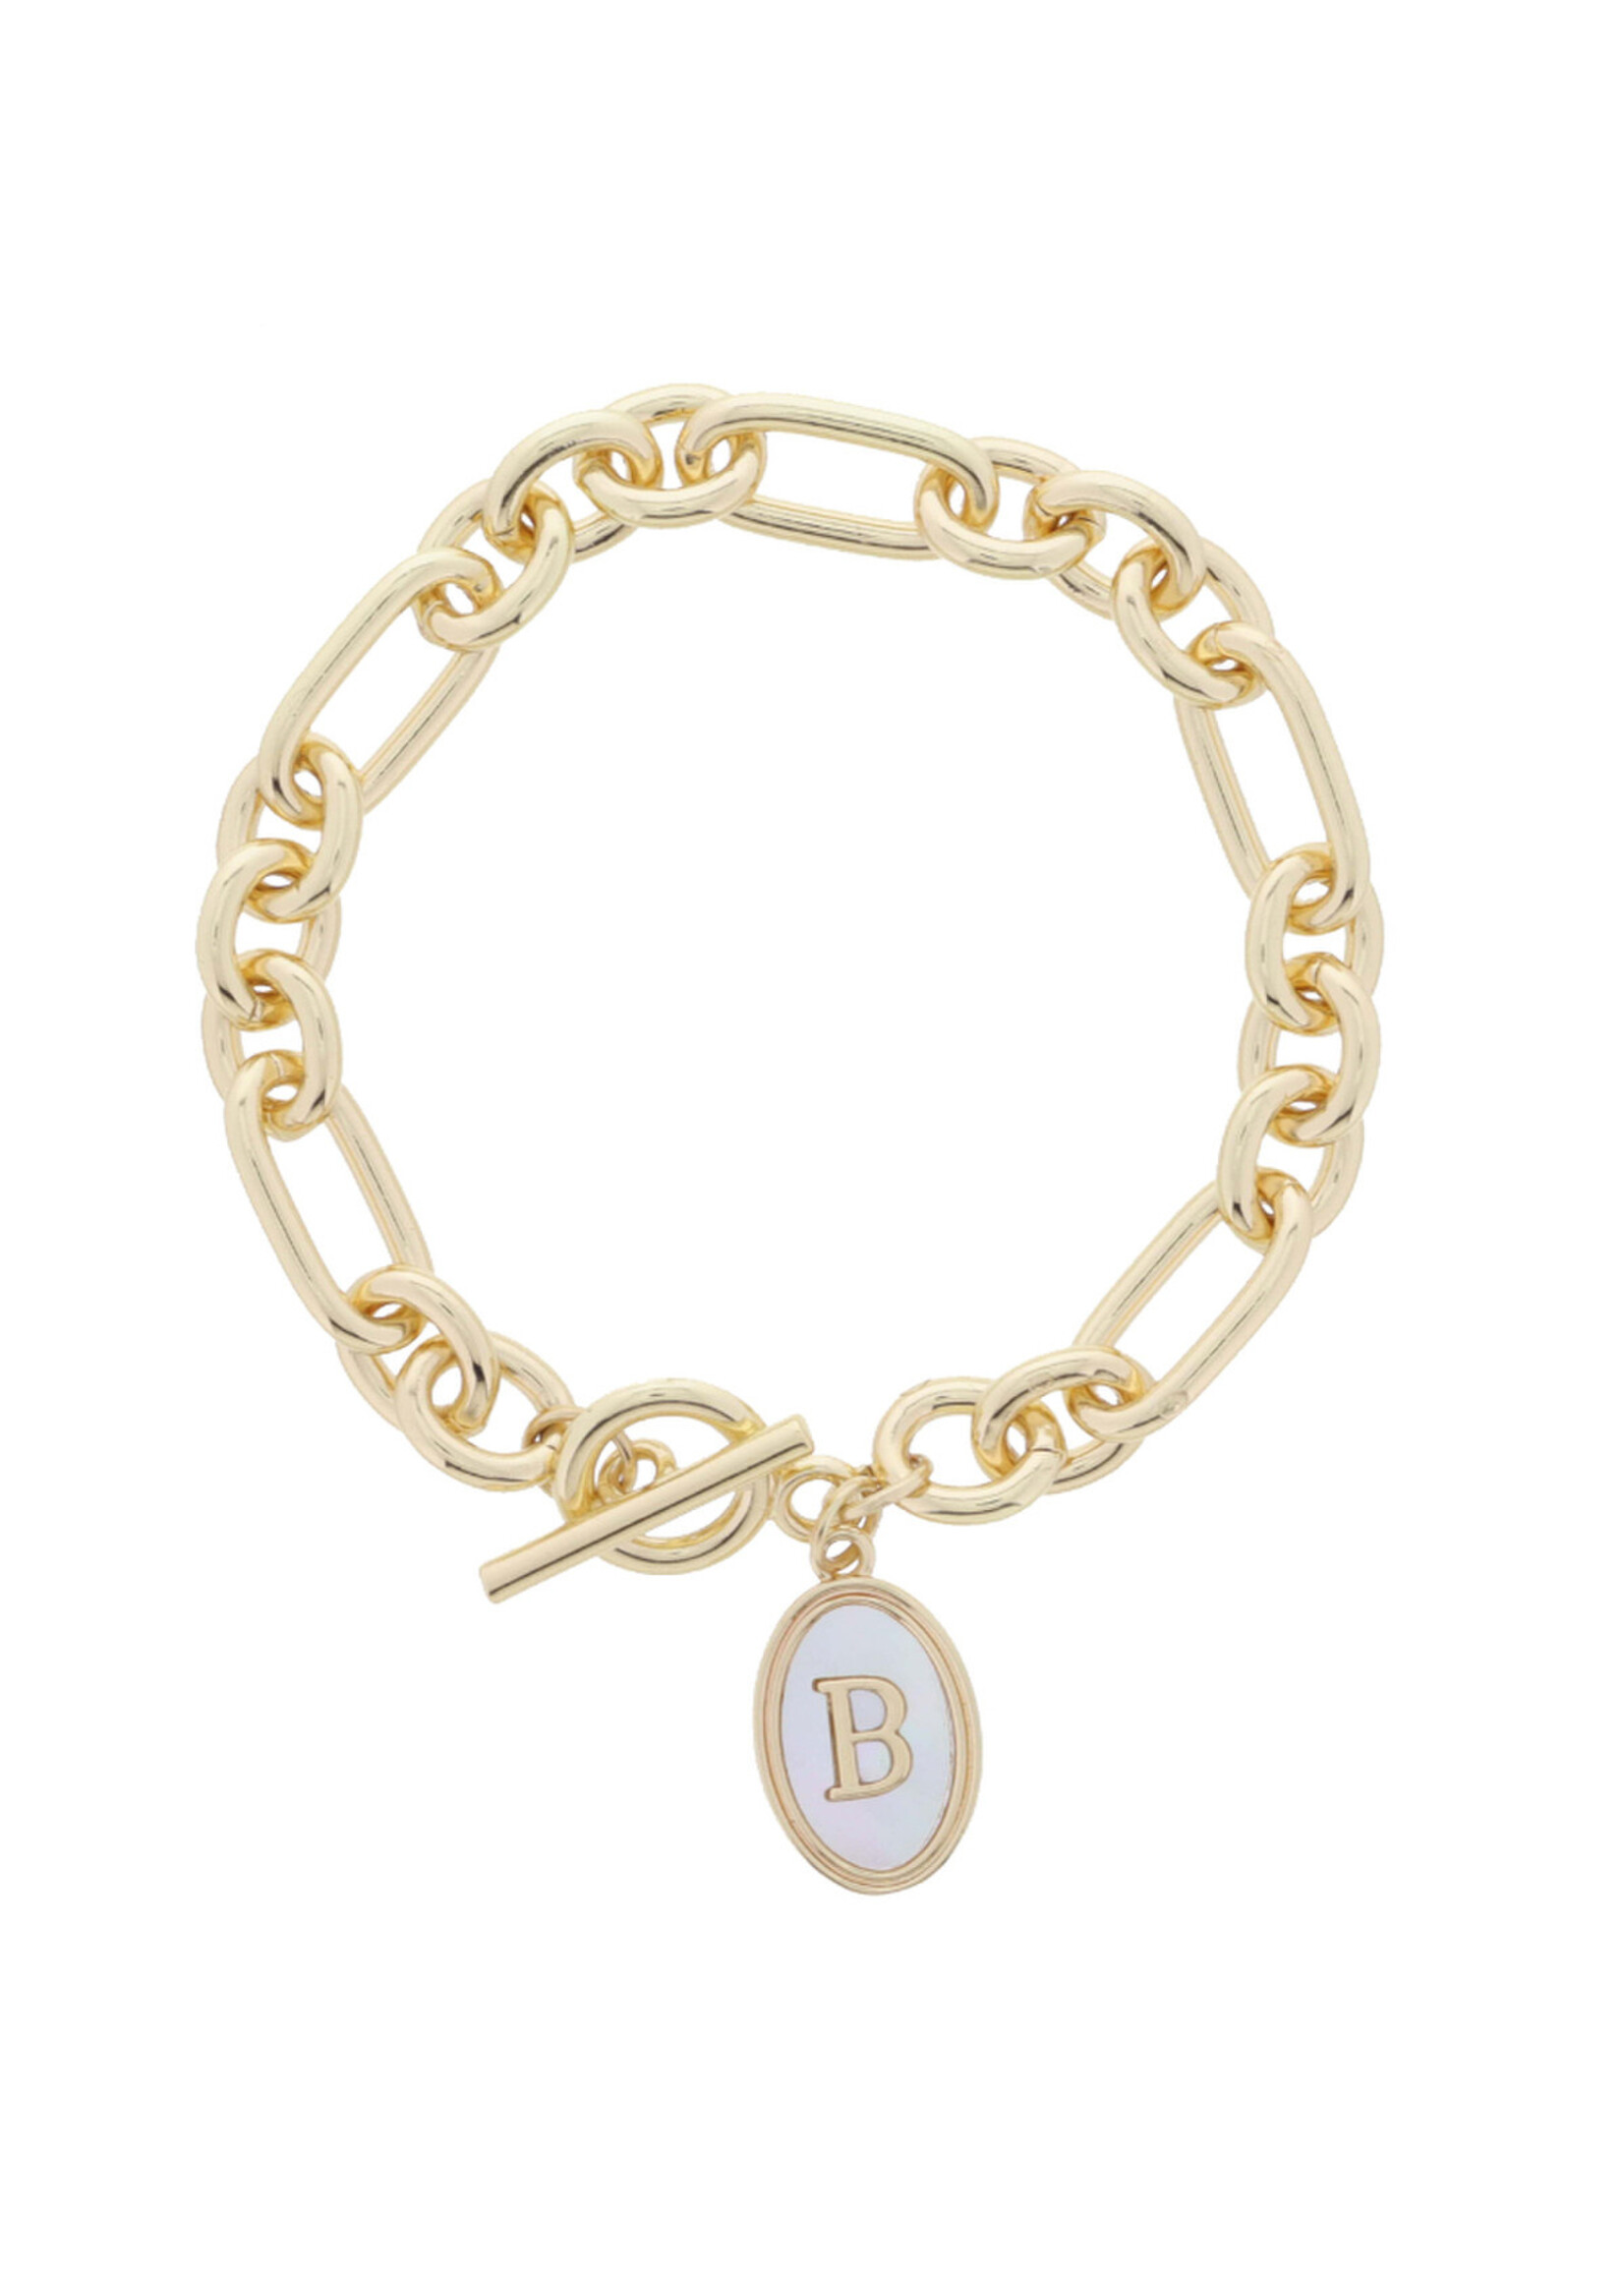 Jane Marie Initial Center on Gold Toggle Bracelet